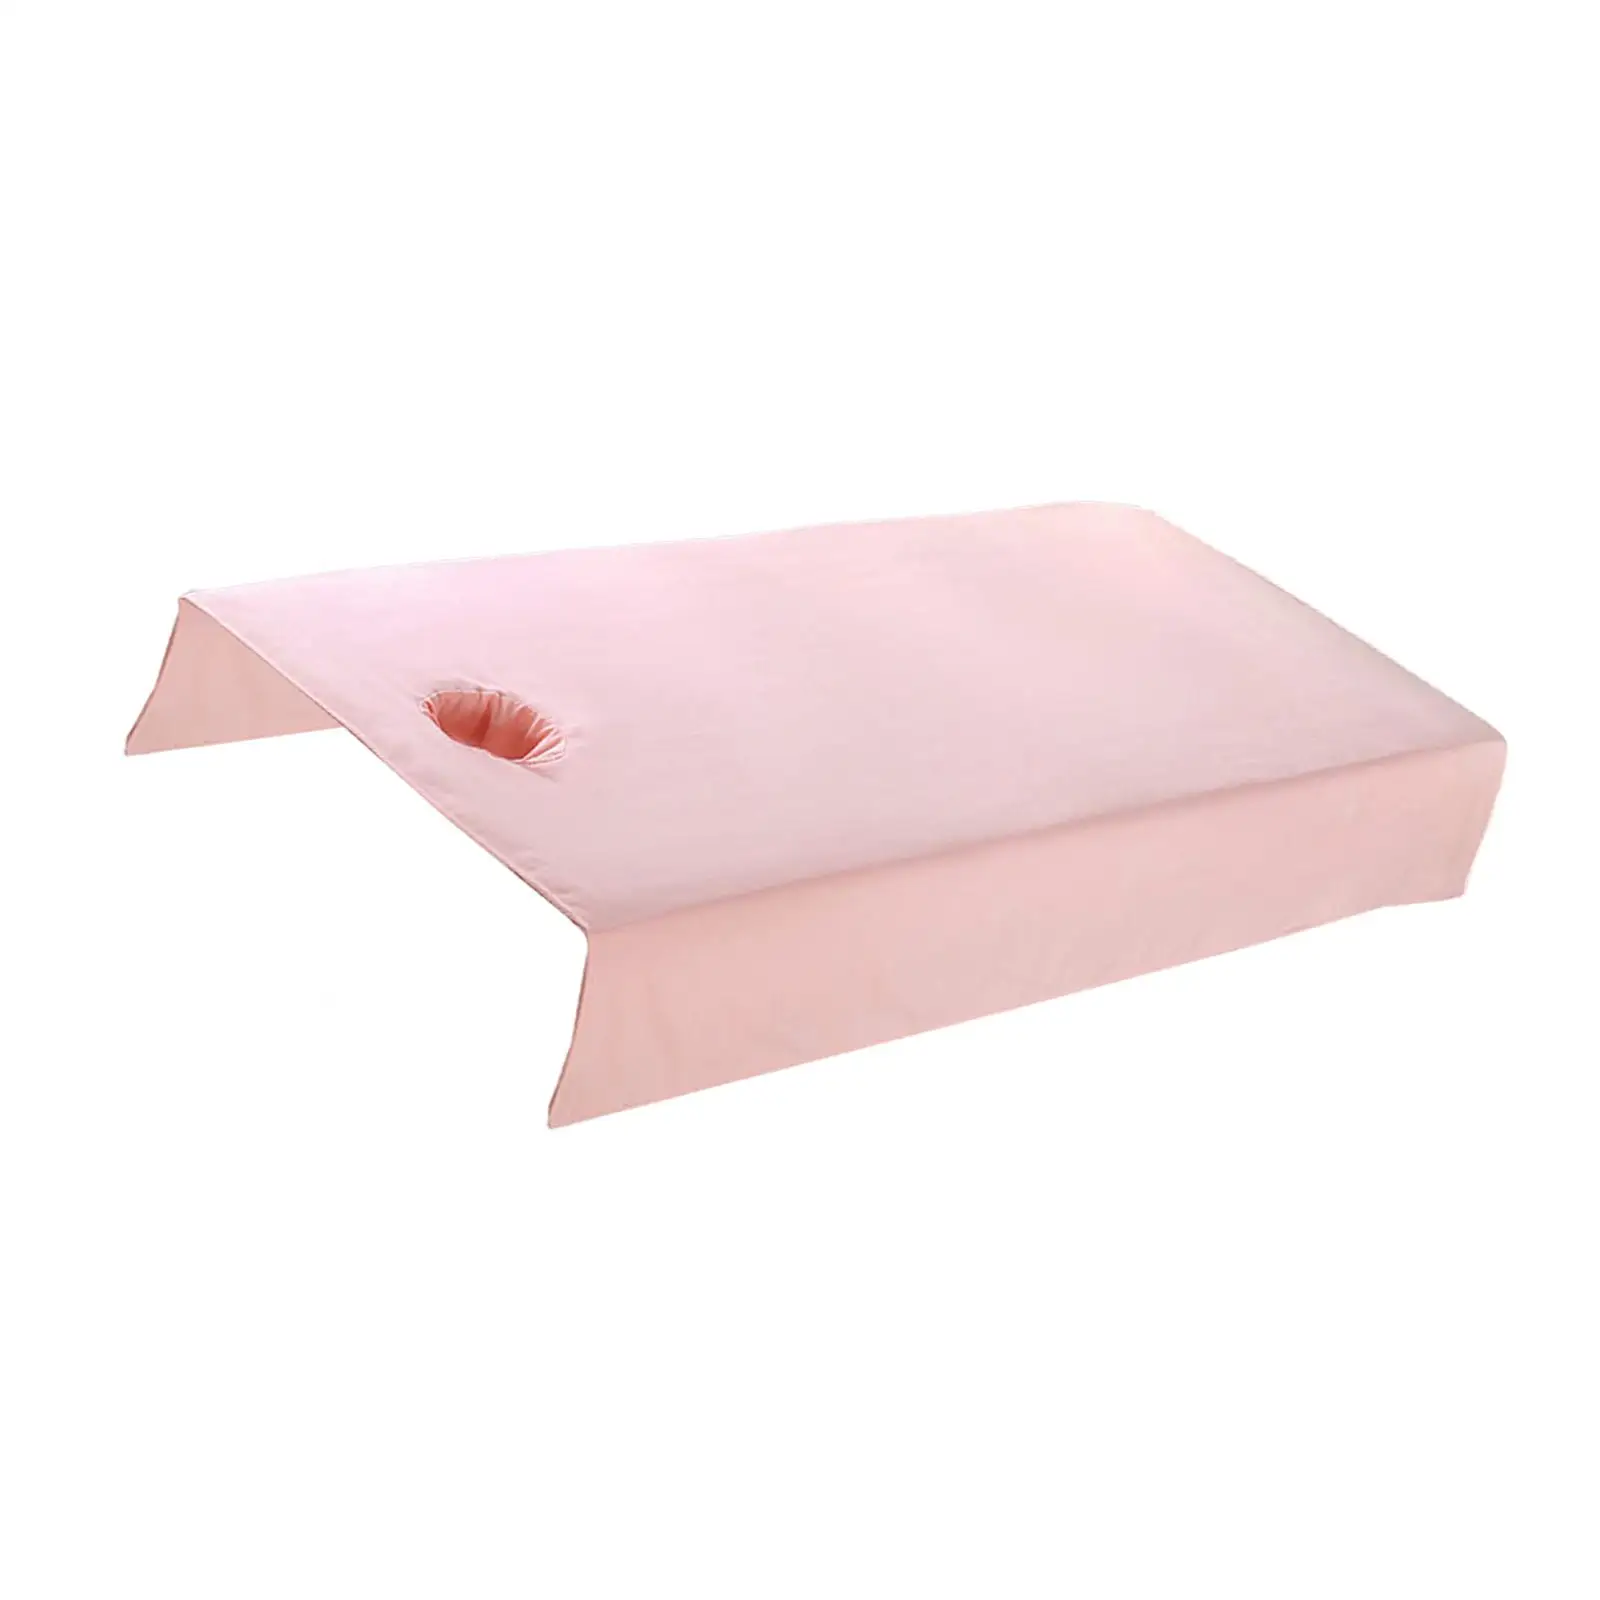 Beauty Salon Massage Table Sheet Cover with Breathable Hole 80Cmx200cm Exquisite Workmanship Easily Install for Home or Hotel